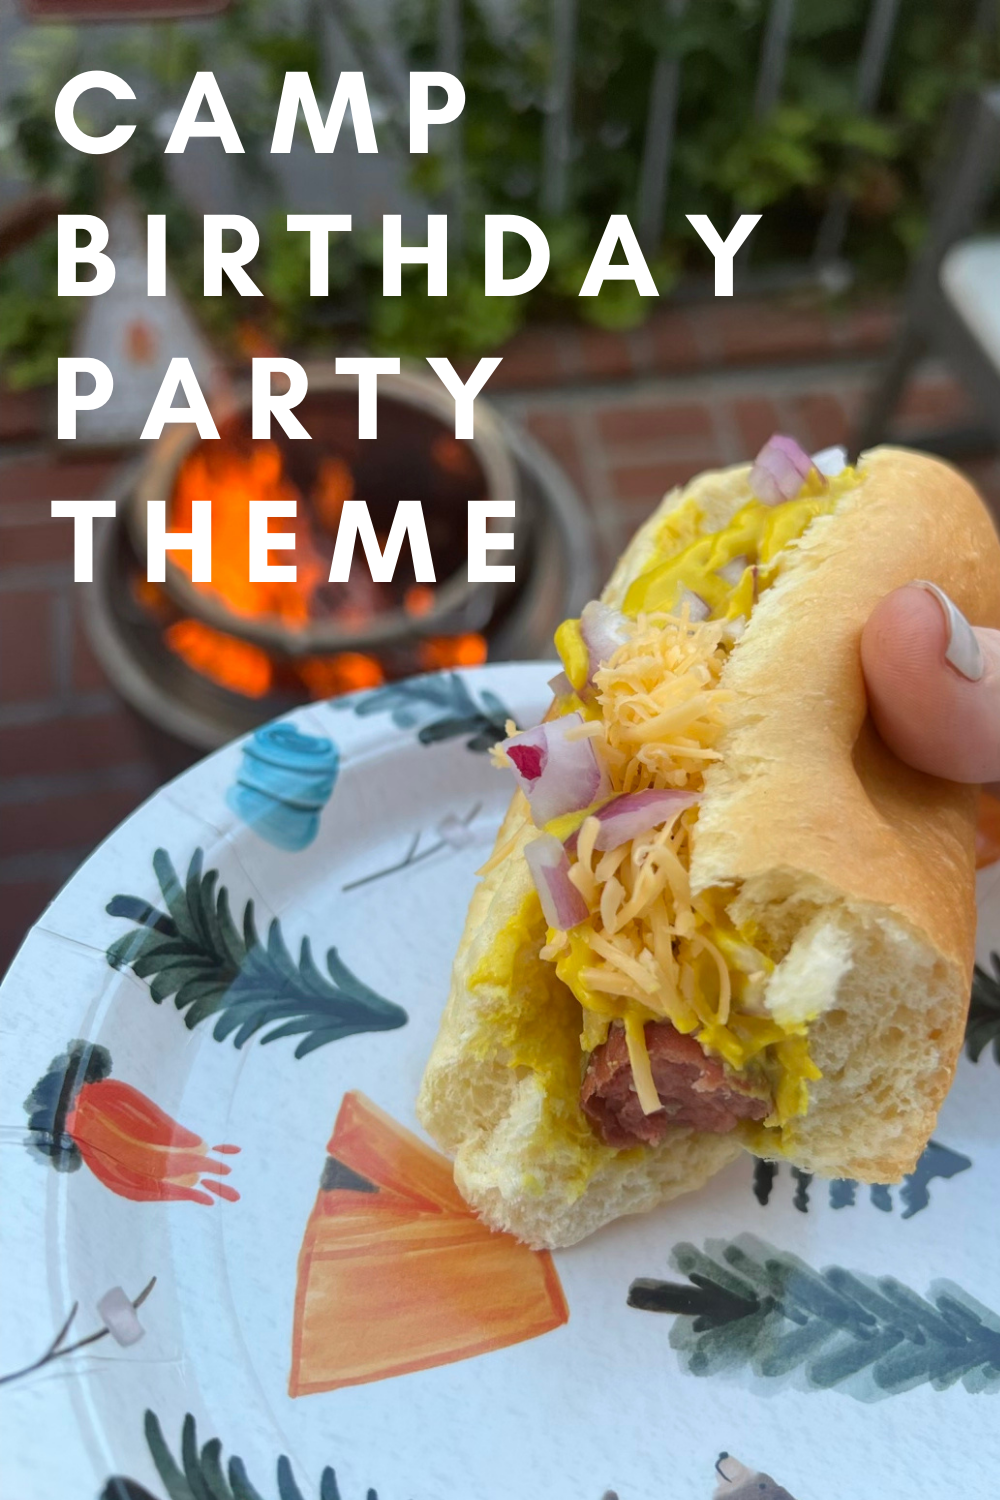 camp birthday party theme, camping, summer camp, campfire, diy trail mix, first birthday party, 31st birthday, birthday party theme ideas, lments of style, fall party, summer party, kid party, adult party, smores cake